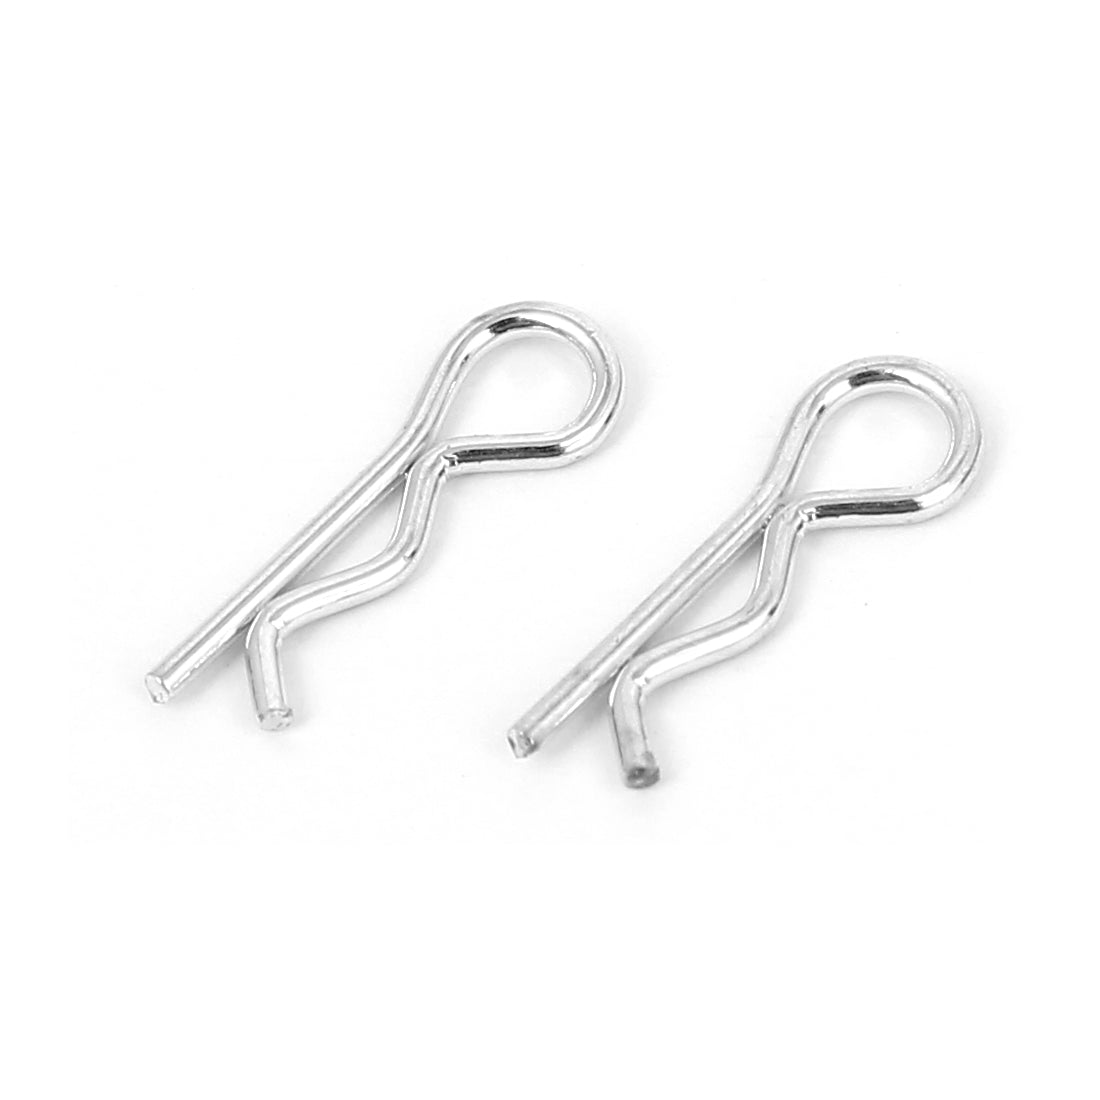 uxcell Uxcell 1mm x 16mm Hair Pin Shaped Zinc Plated Cotter Clip Silver Tone 50pcs